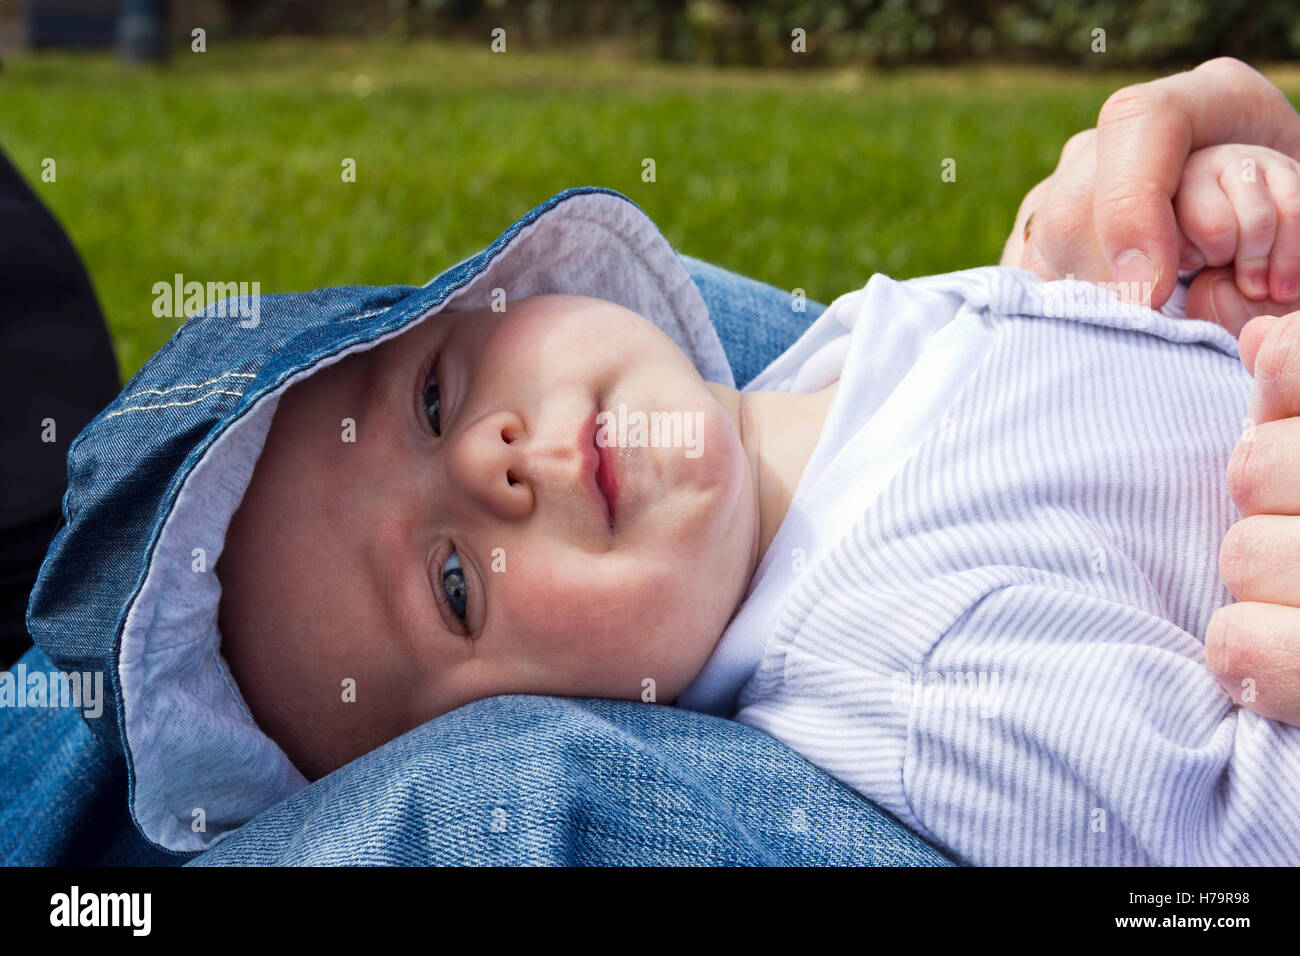 Baby boy dribbling and wearing a sun hat Stock Photo